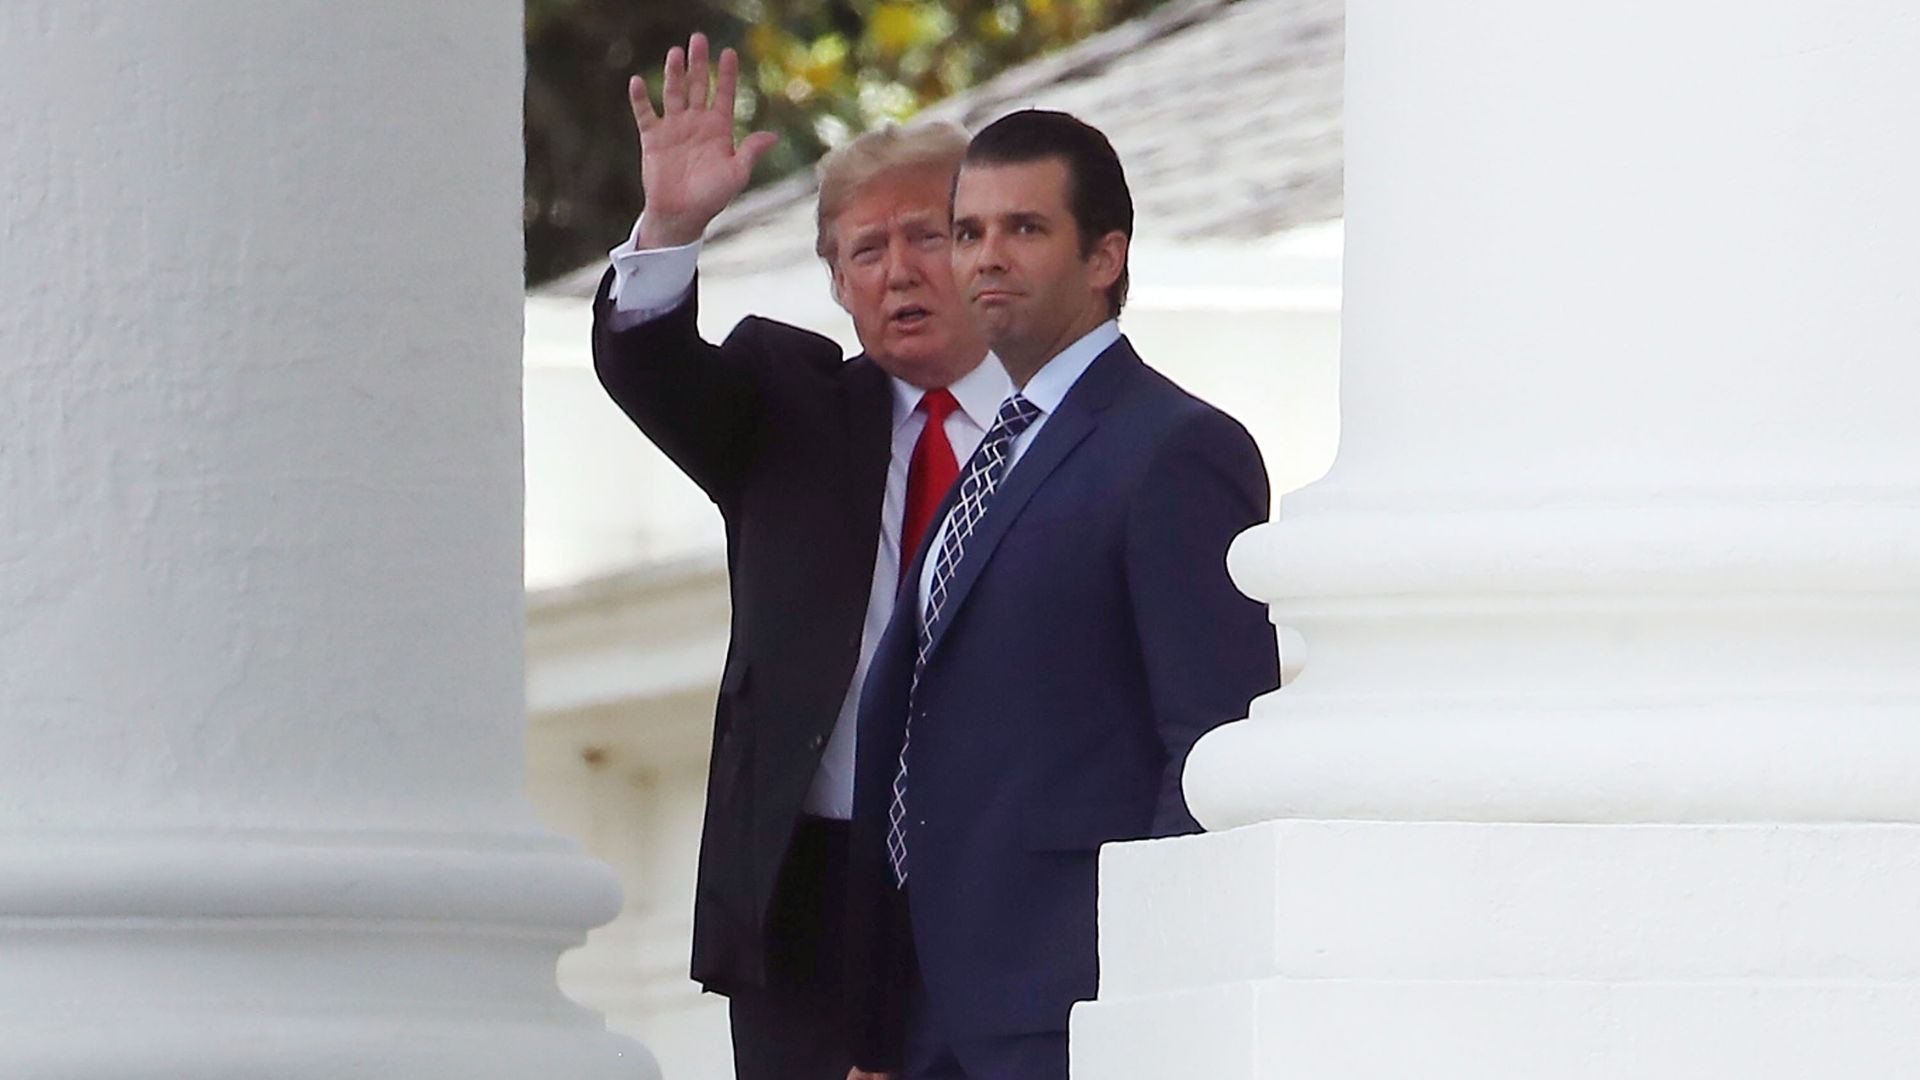 President Trump at the White House with his son, Don Jr.